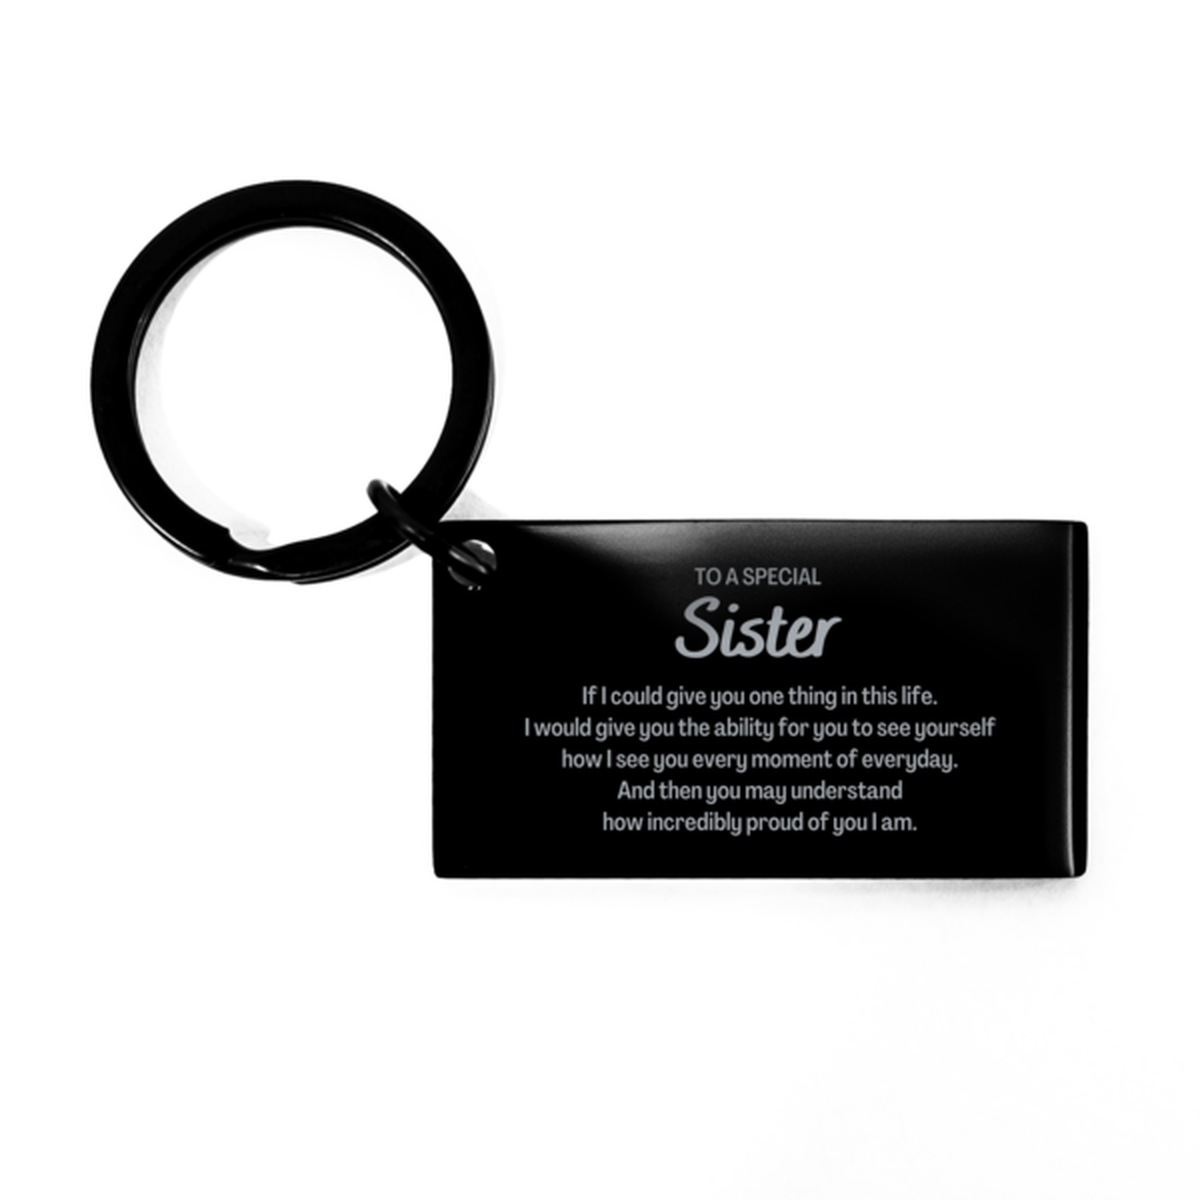 To My Sister Keychain, Gifts For Sister Engraved, Inspirational Gifts for Christmas Birthday, Epic Gifts for Sister To A Special Sister how incredibly proud of you I am